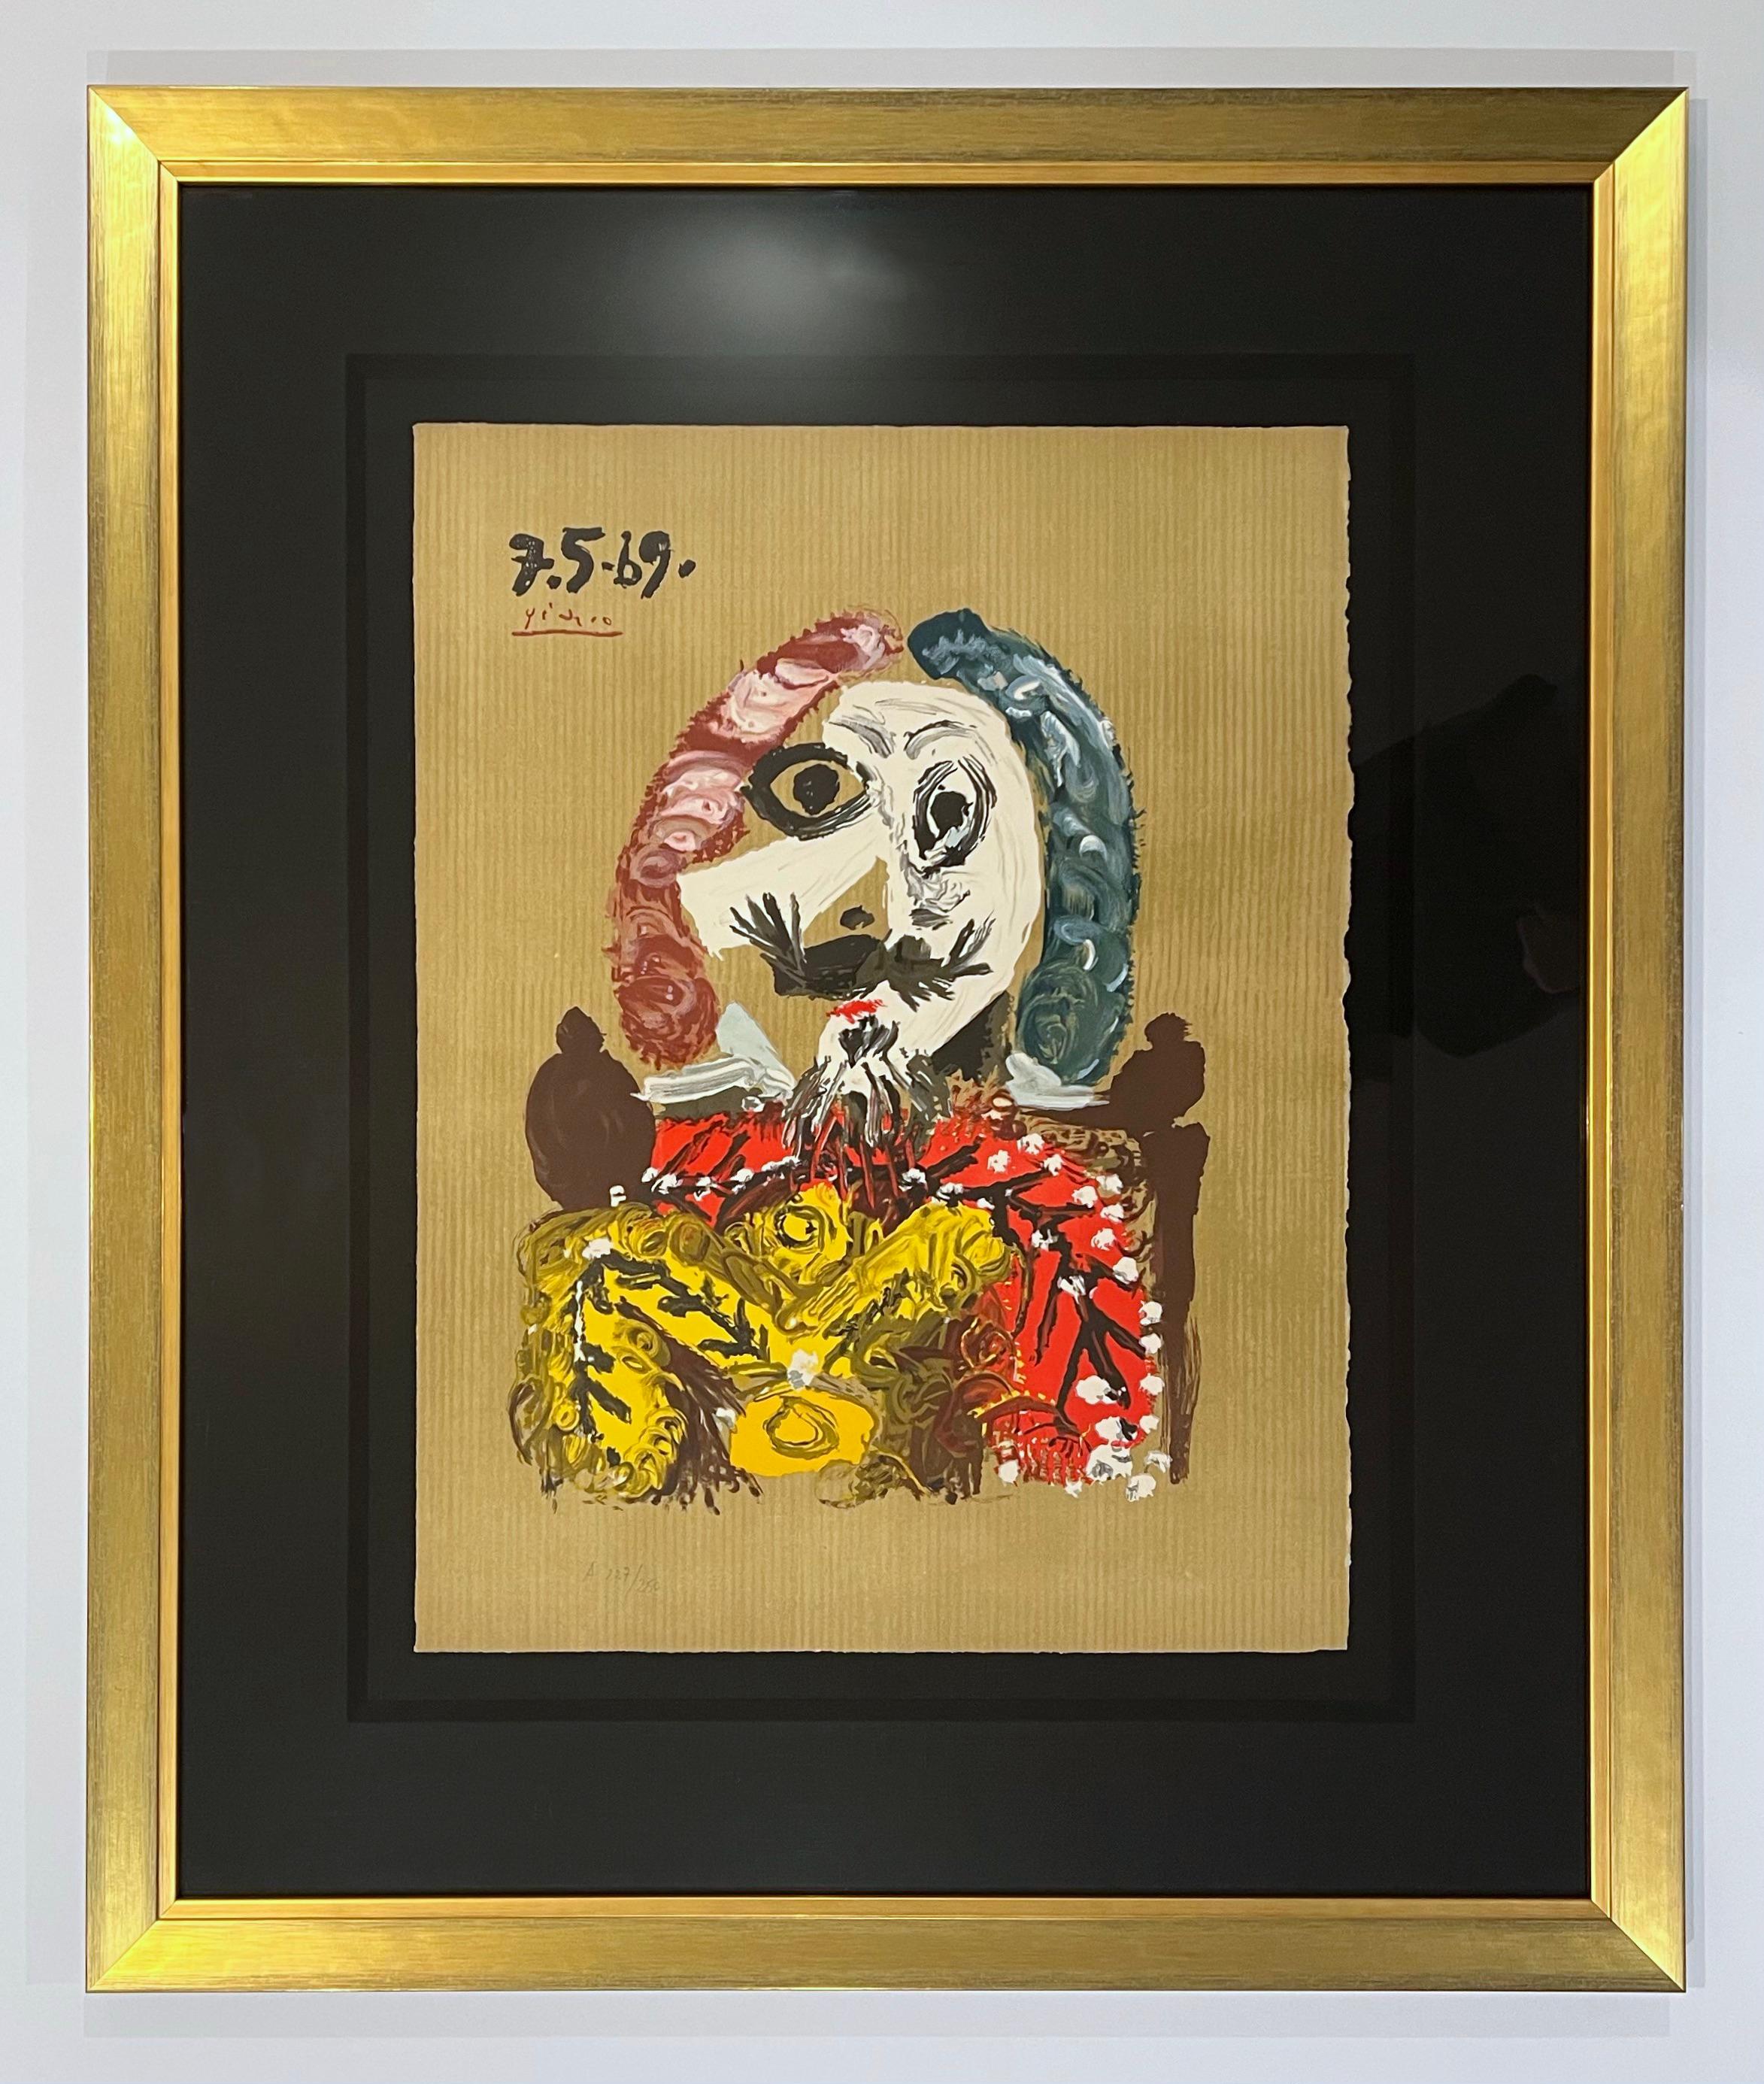 Artist: Pablo Picasso (after)
Title: Portraits Imaginaire 7.5.69
Portfolio: 1969 Portraits Imaginaires
Medium: Color lithograph on Arches paper
Date: 1969
Edition: A227/250
Frame Size: 38